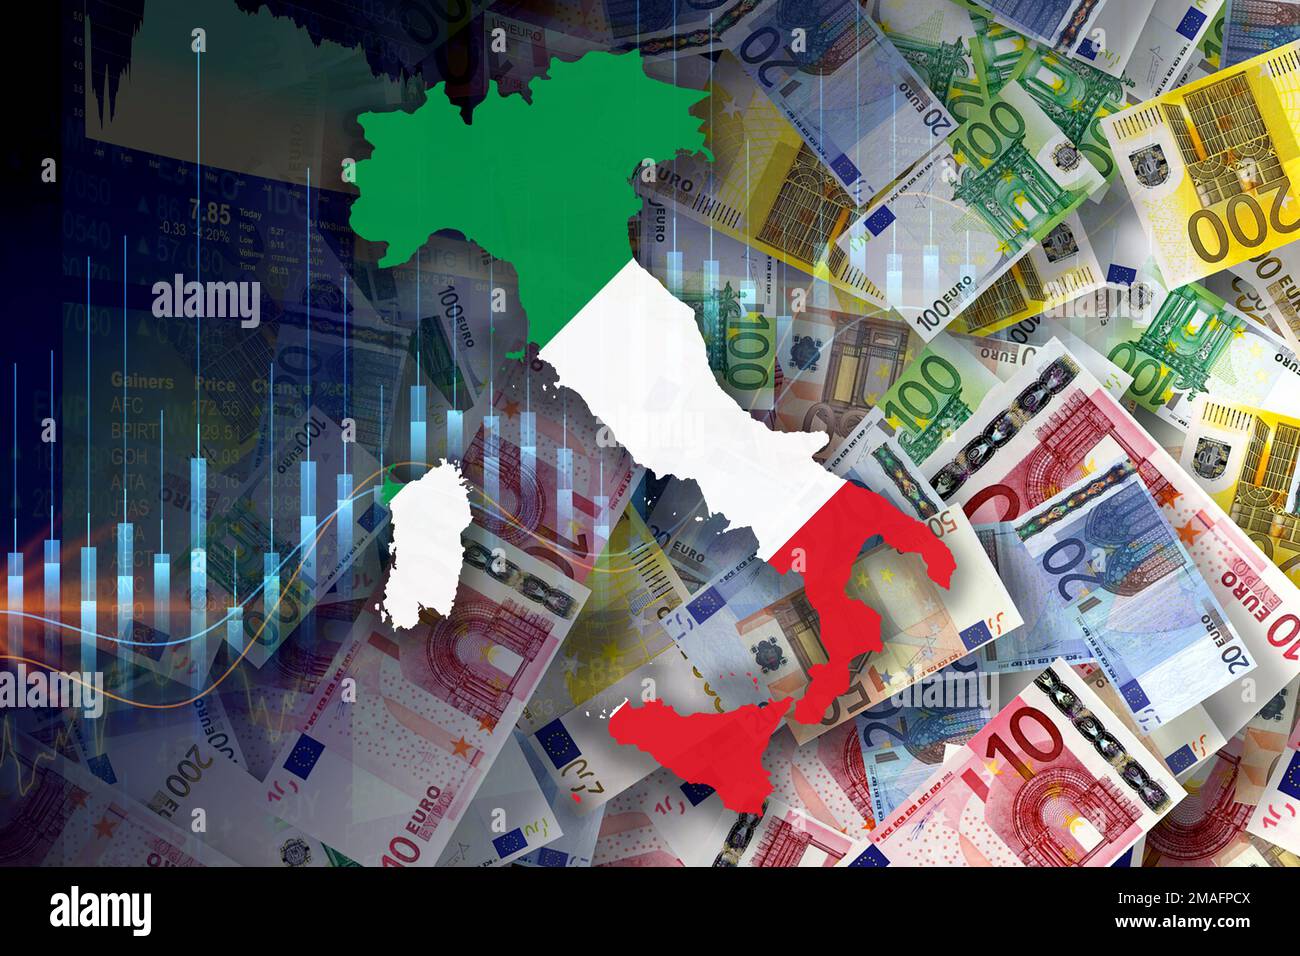 Italy map and flag, cash euro banknotes and stock market indicators (economy, money, inflation, crisis, markets, finance, business) Stock Photo